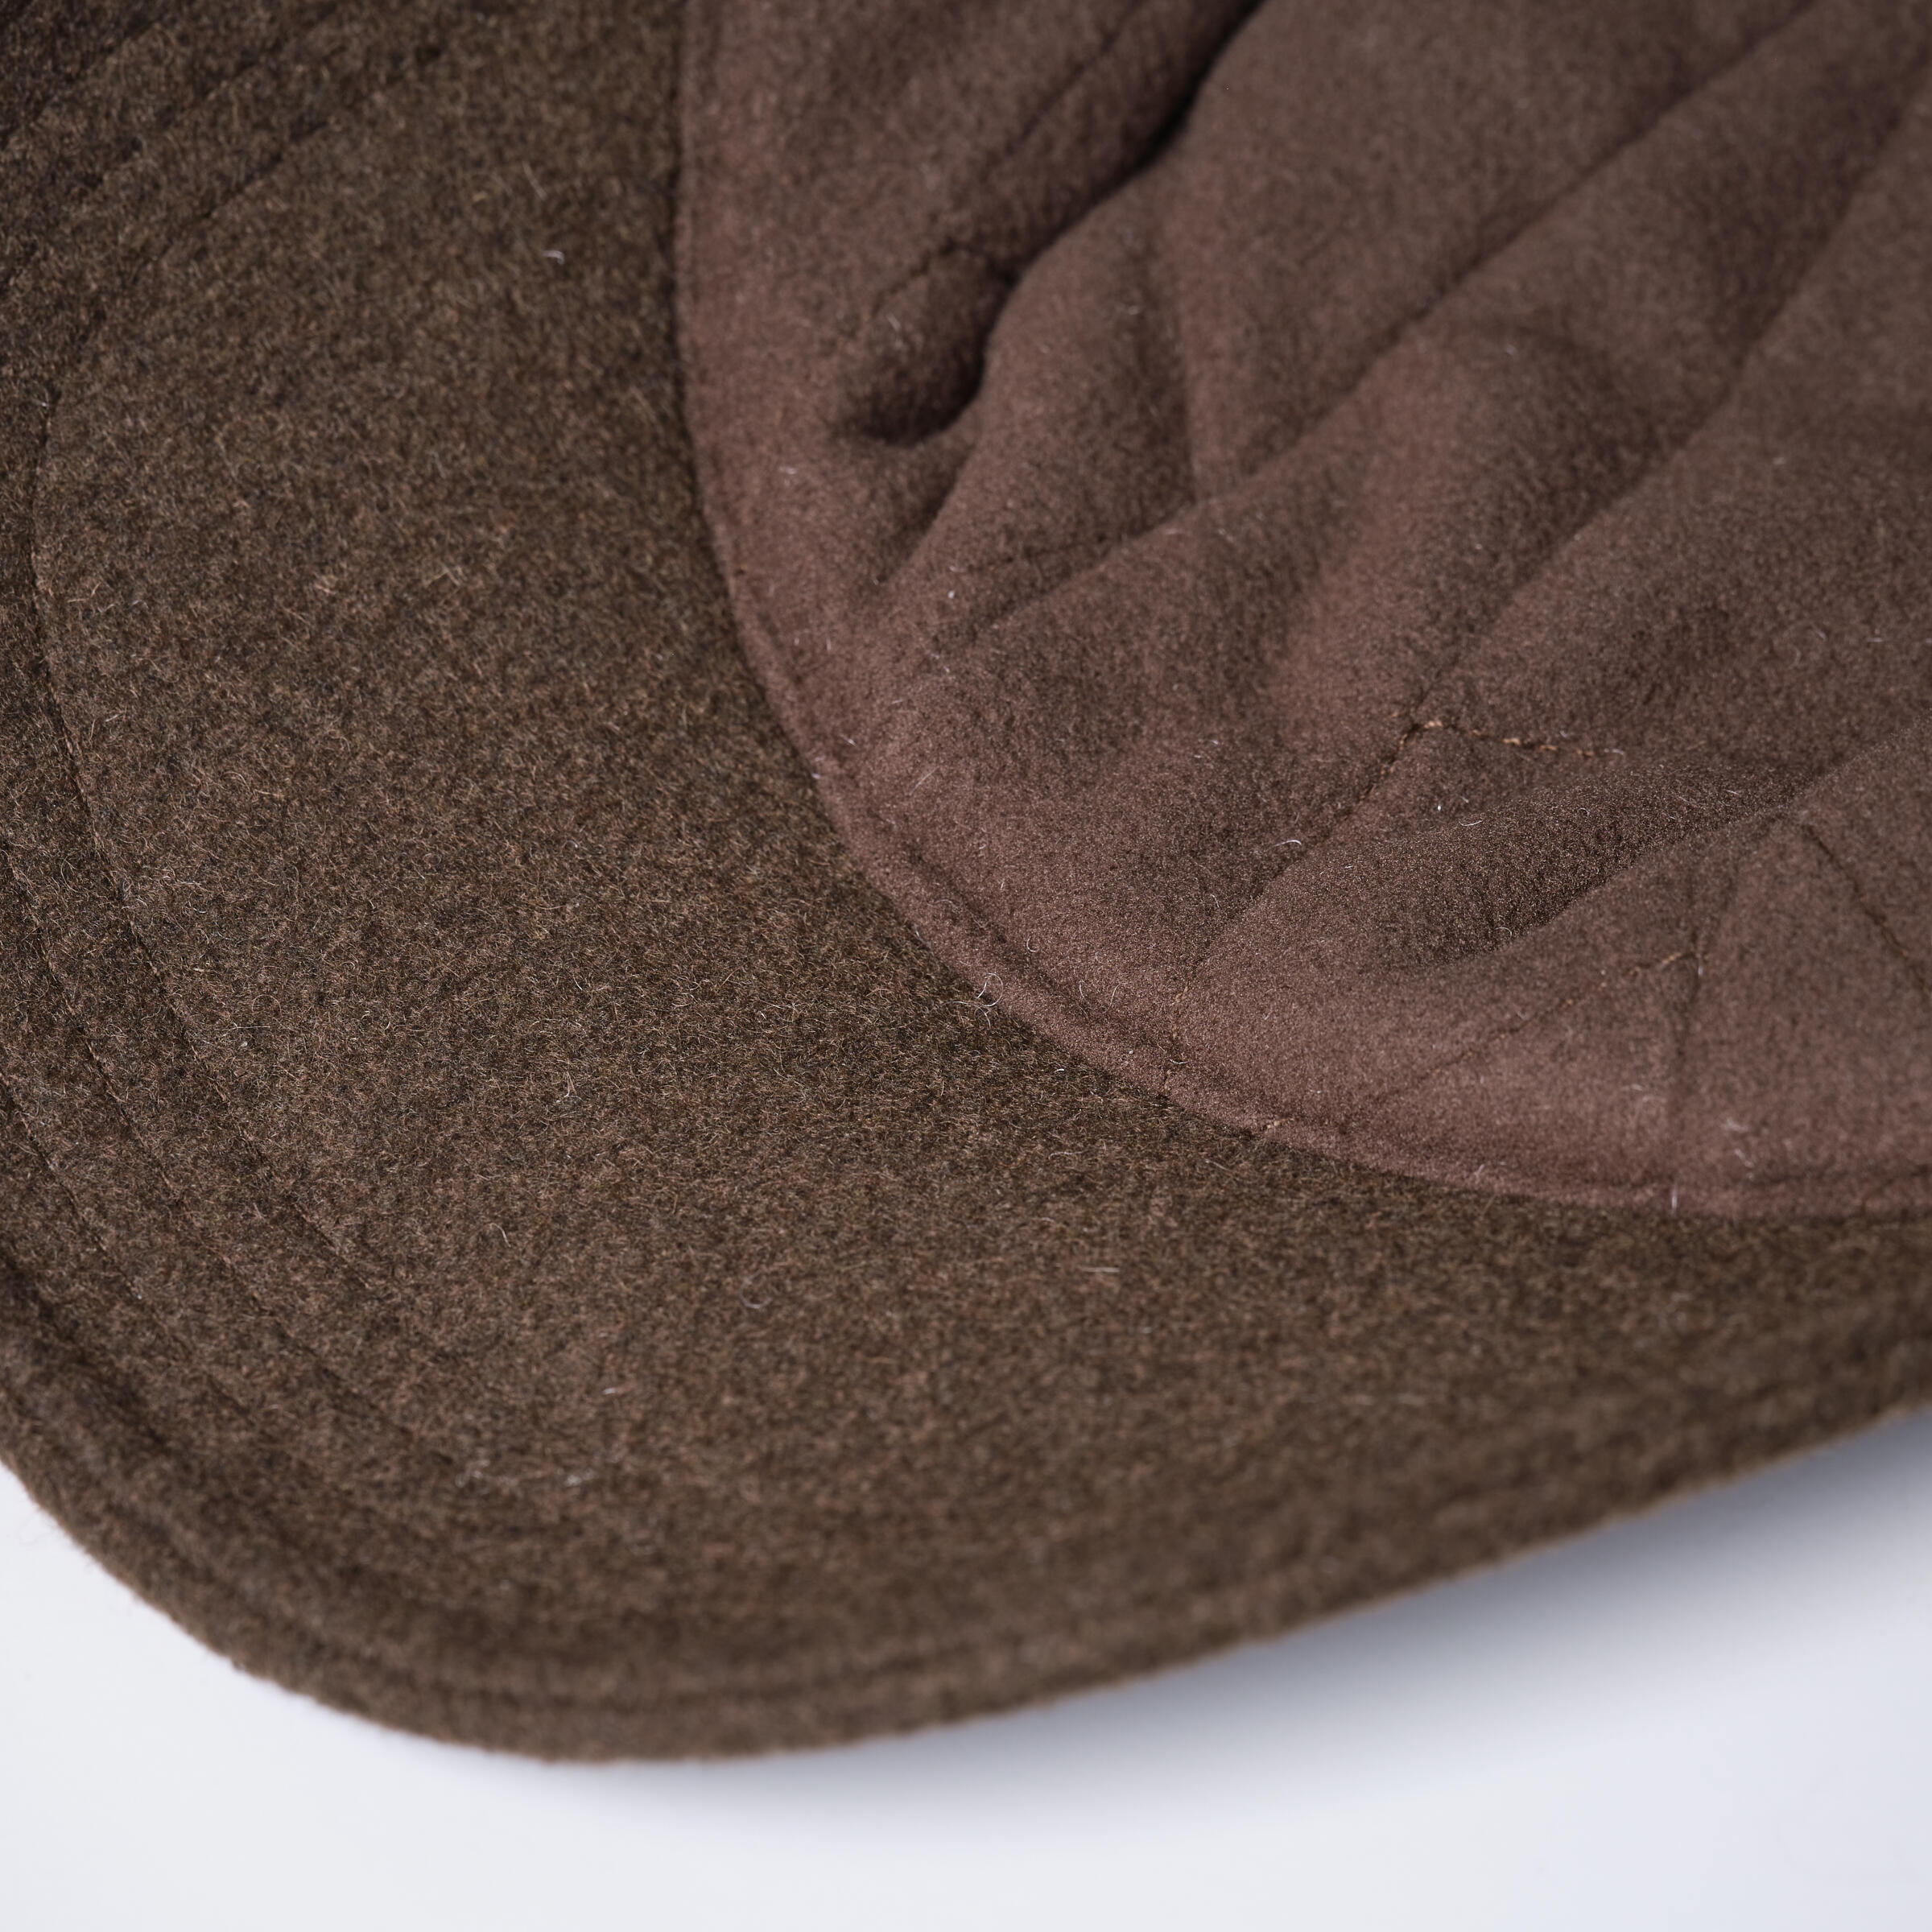 WARM WOOL CAP WITH EAR FLAPS 500 - BROWN 4/5